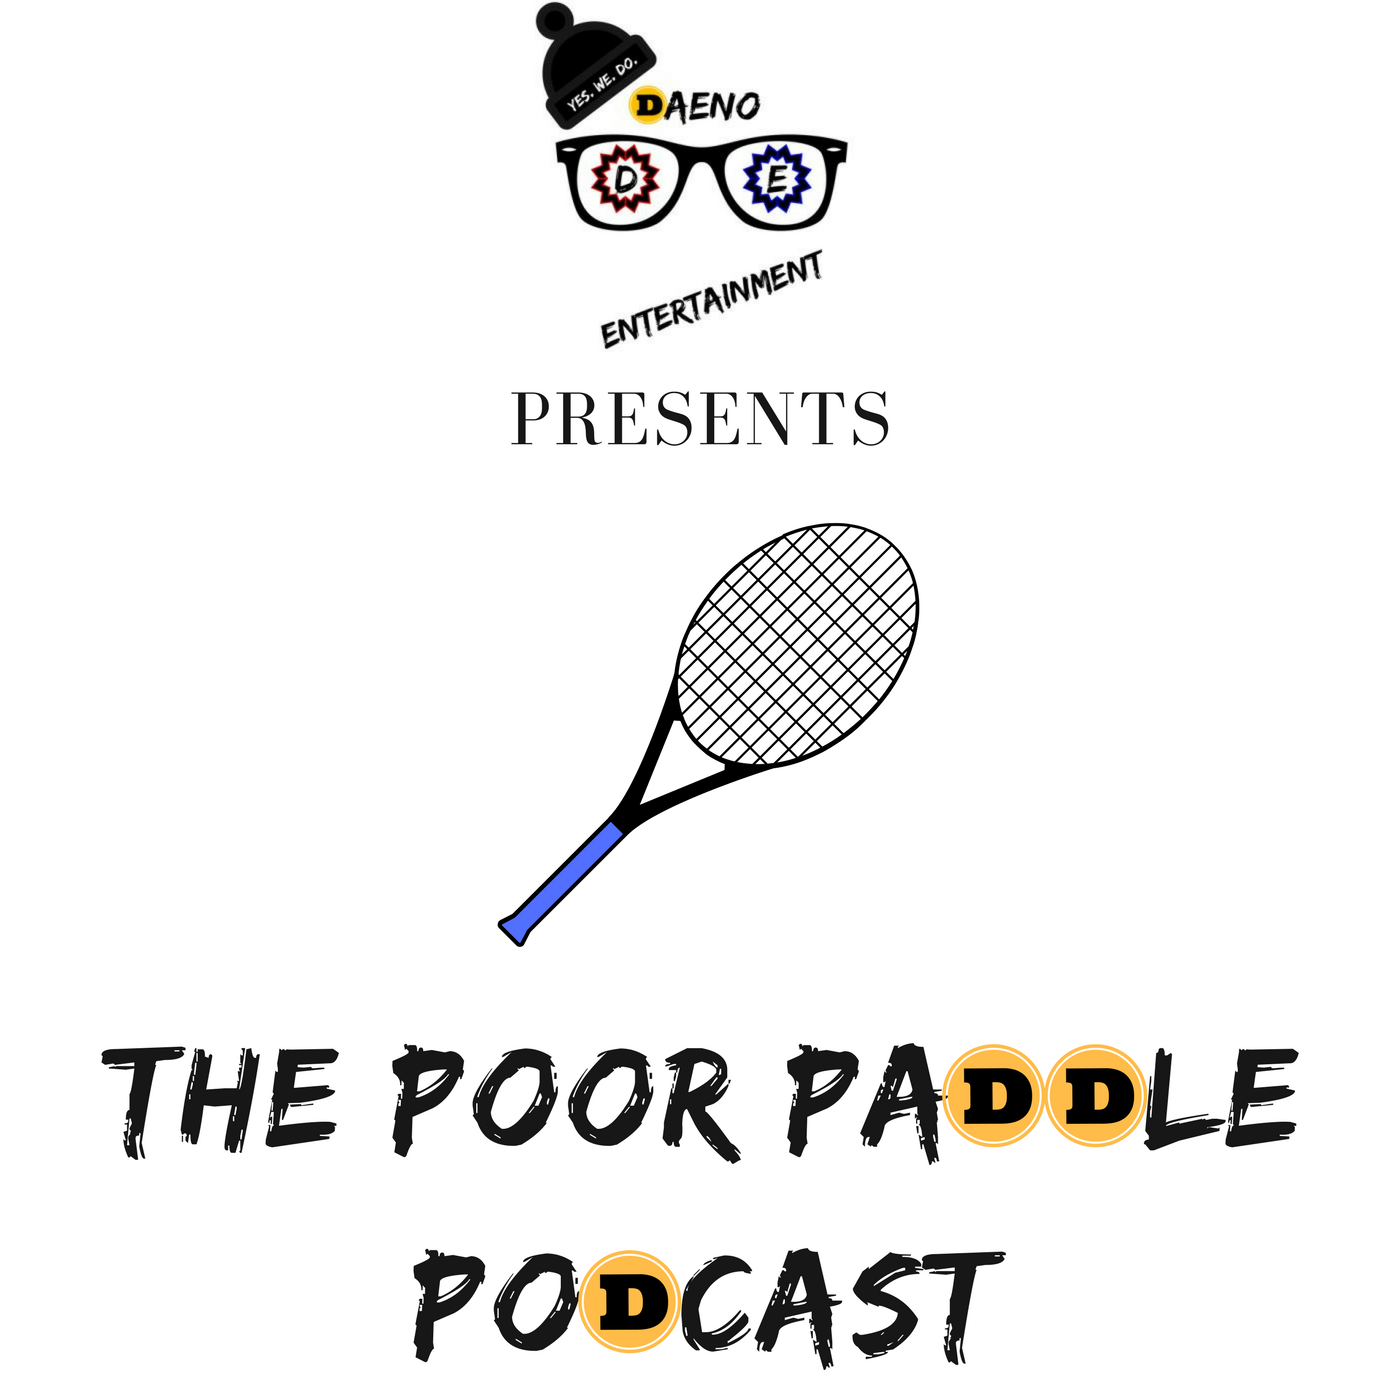 DAENO Entertainment Presents: The Poor Paddle Podcast